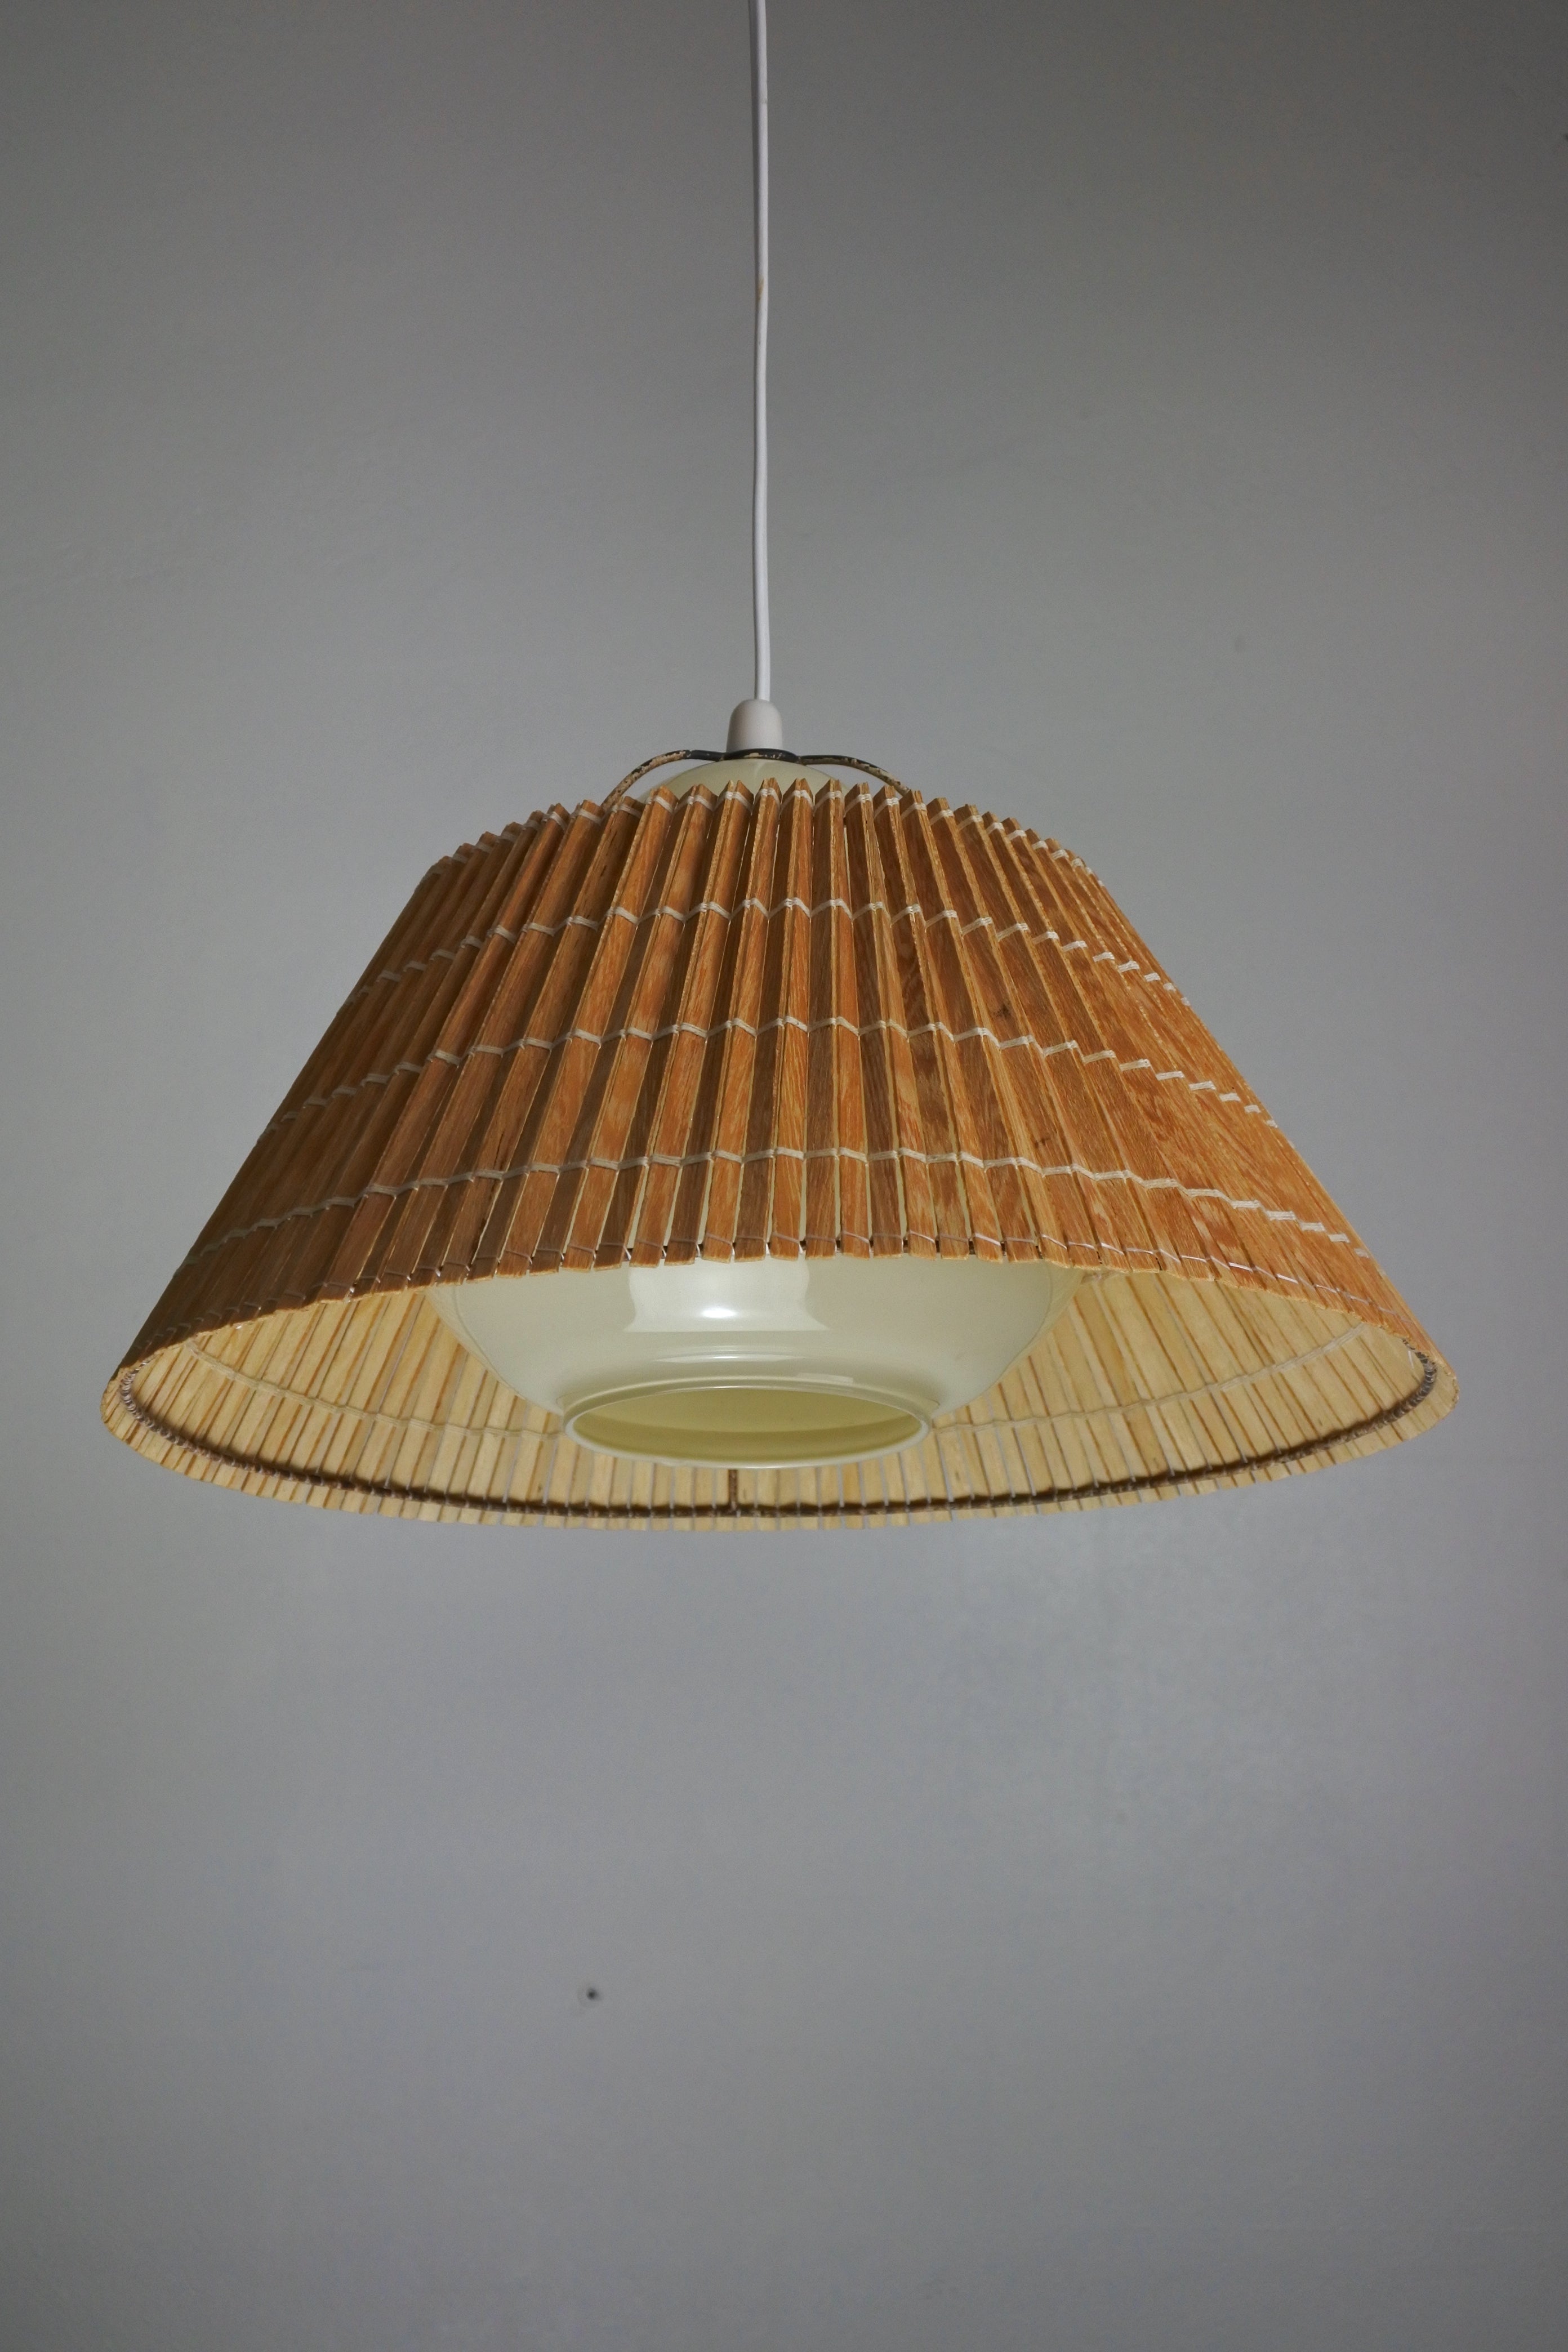 Pendant lamp by Lisa Johansson-Pape.
Manufactured by Orno in Finland in the 1950s.

Yellow opaline glass diffuser with a wooden shade.

Literature: Orno catalogues of the period.

Adjustable height. 70 cm as shown.

Original electrical